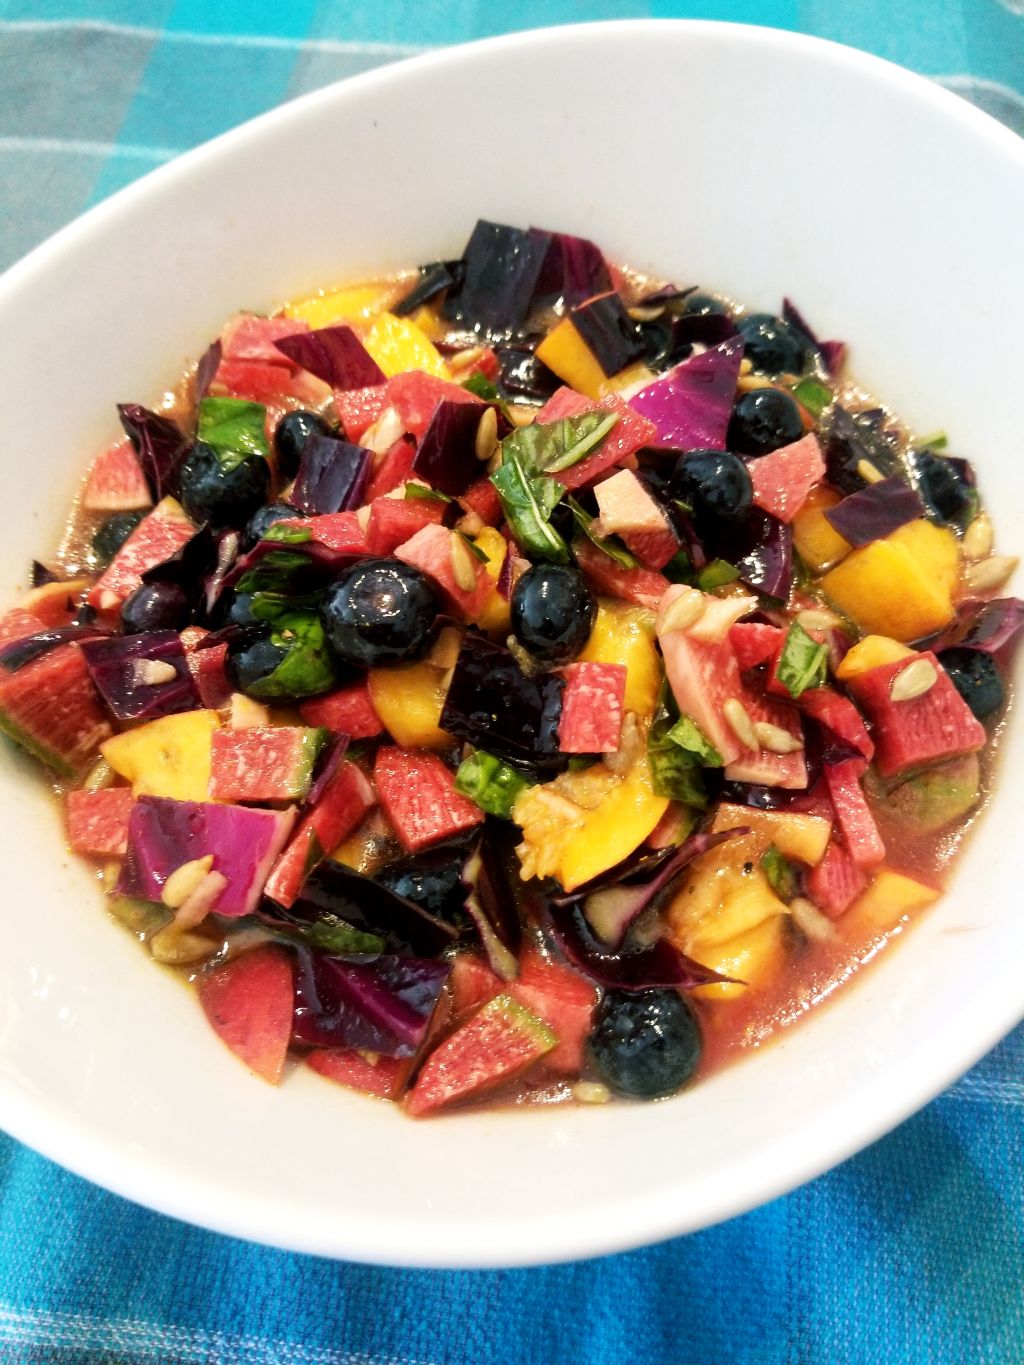 Watermelon Radish Salad with Peach and Blueberry